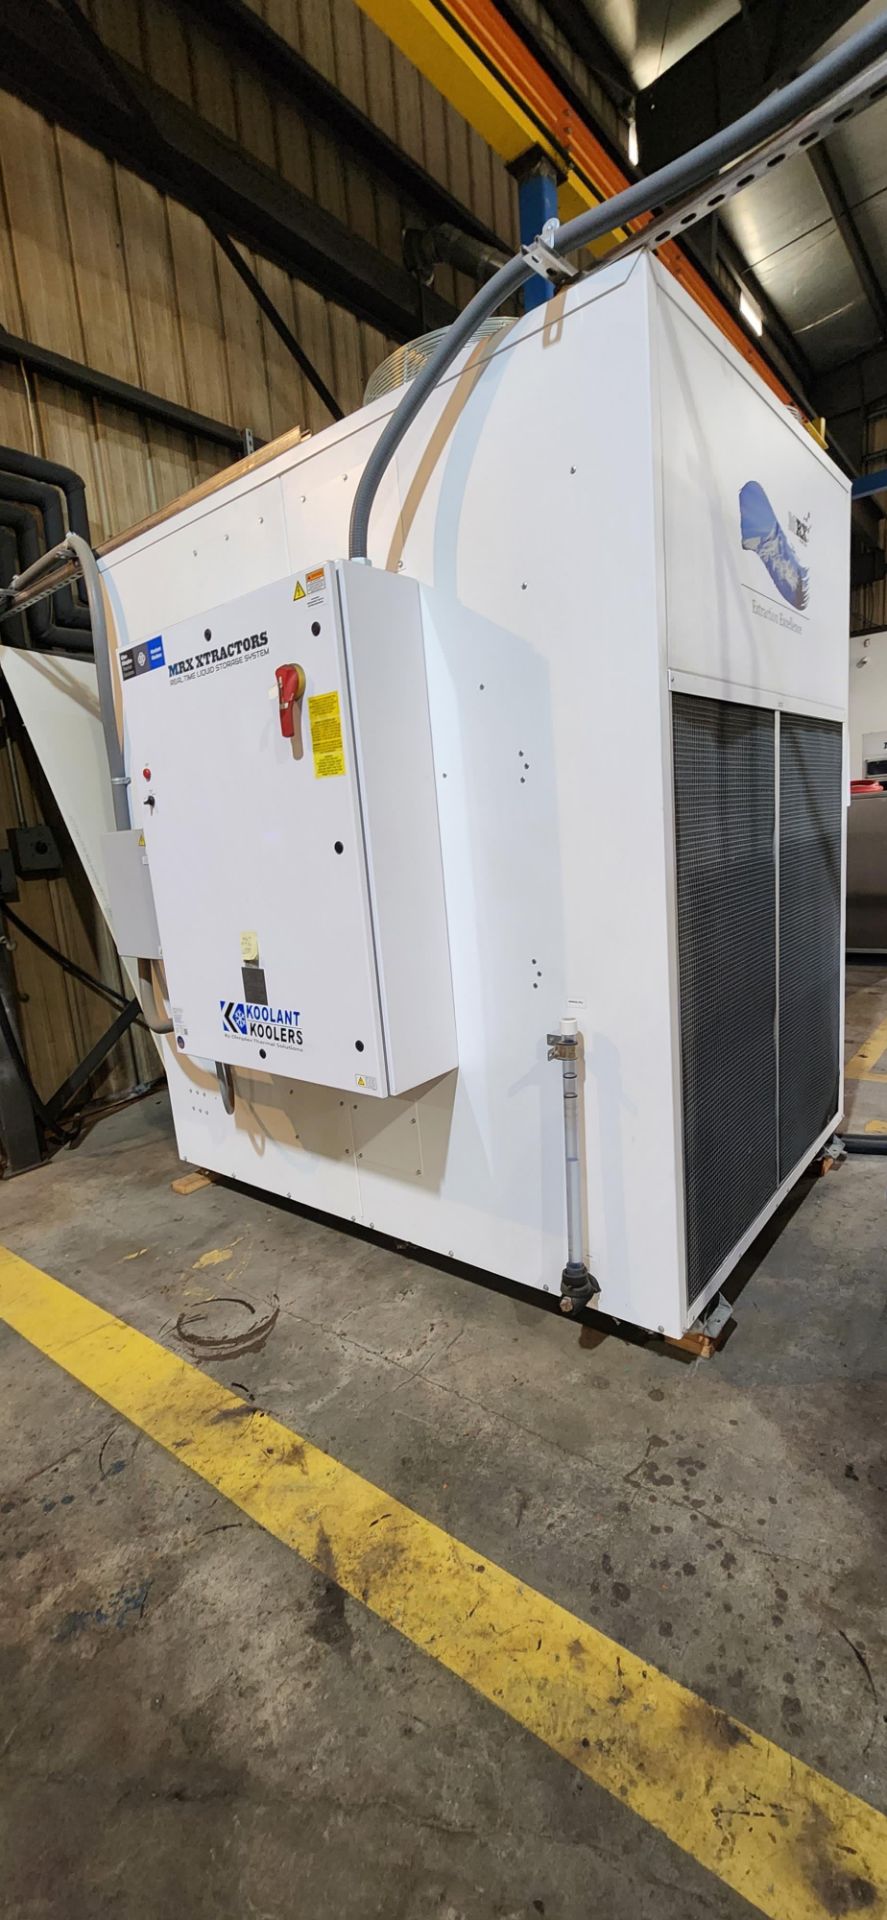 Used Dimplex Koolant Koolers Outdoor Air-Cooled Chiller. Model WVO-10TON-M - Image 4 of 7